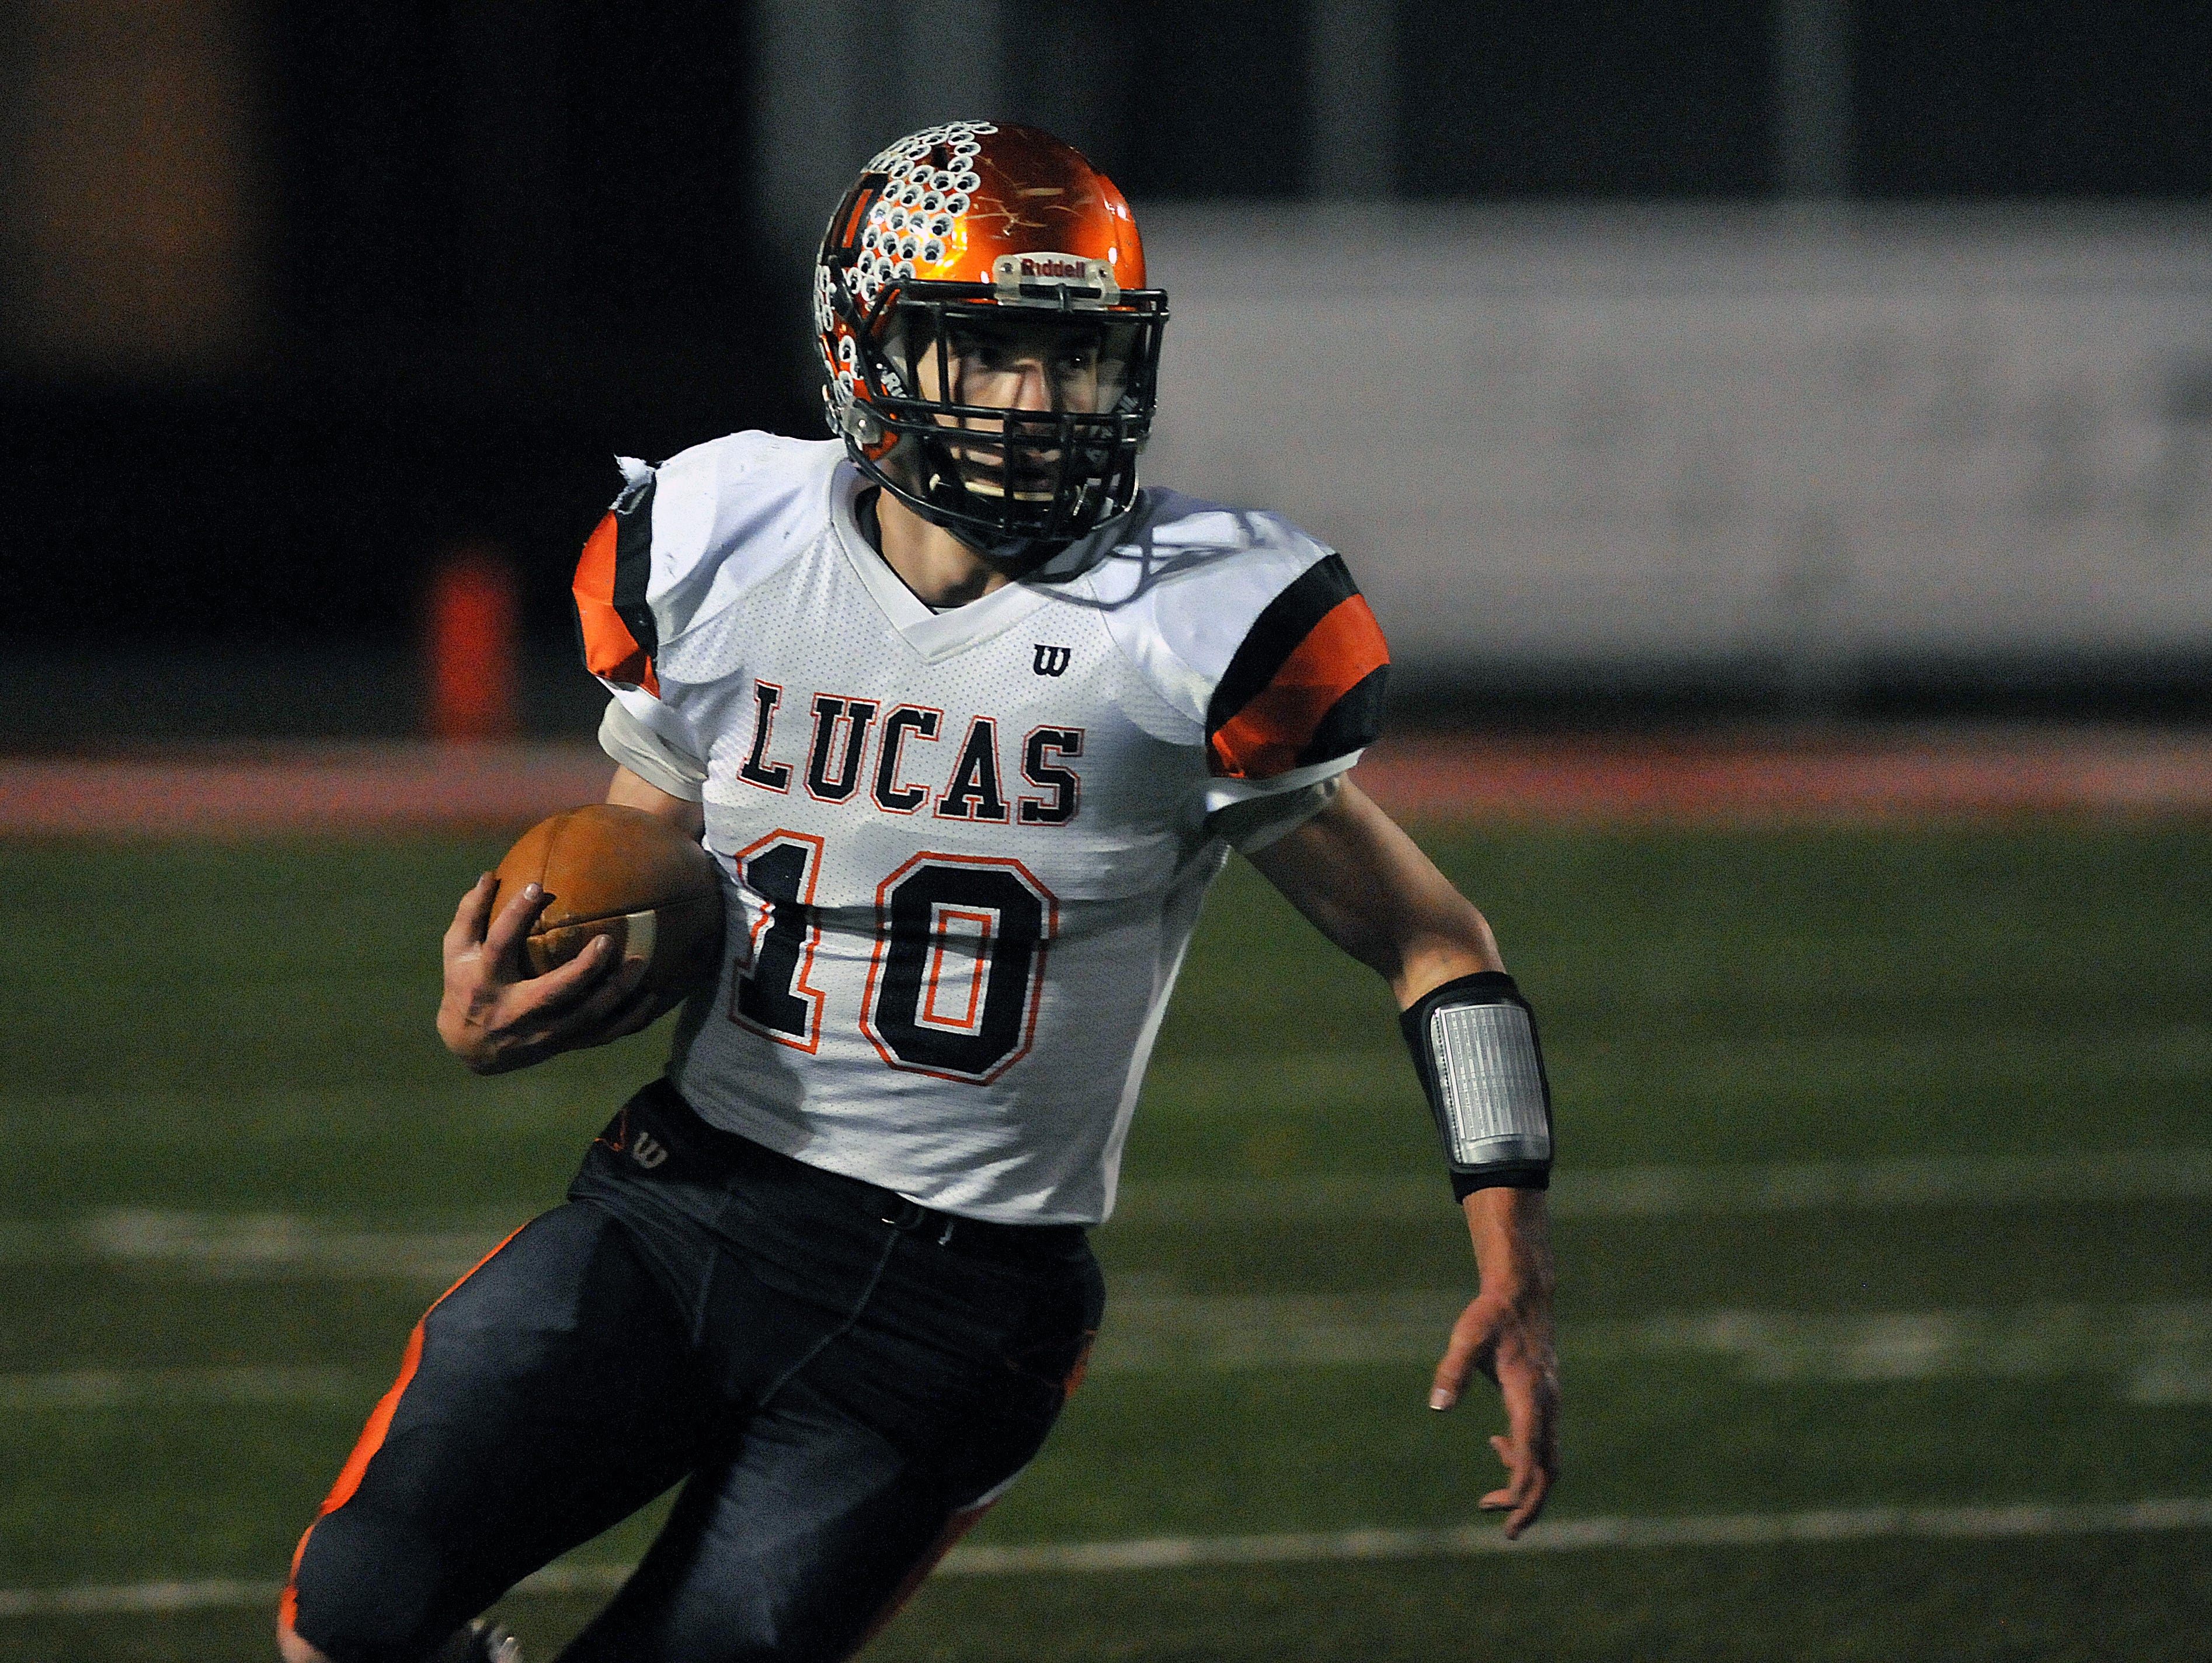 Mason Galco, a senior running back at Lucas, runs the ball against Tiffin Calvert in a Division VII playoff game this year. Galco was named News Journal Co-Offensive Player of the Year.